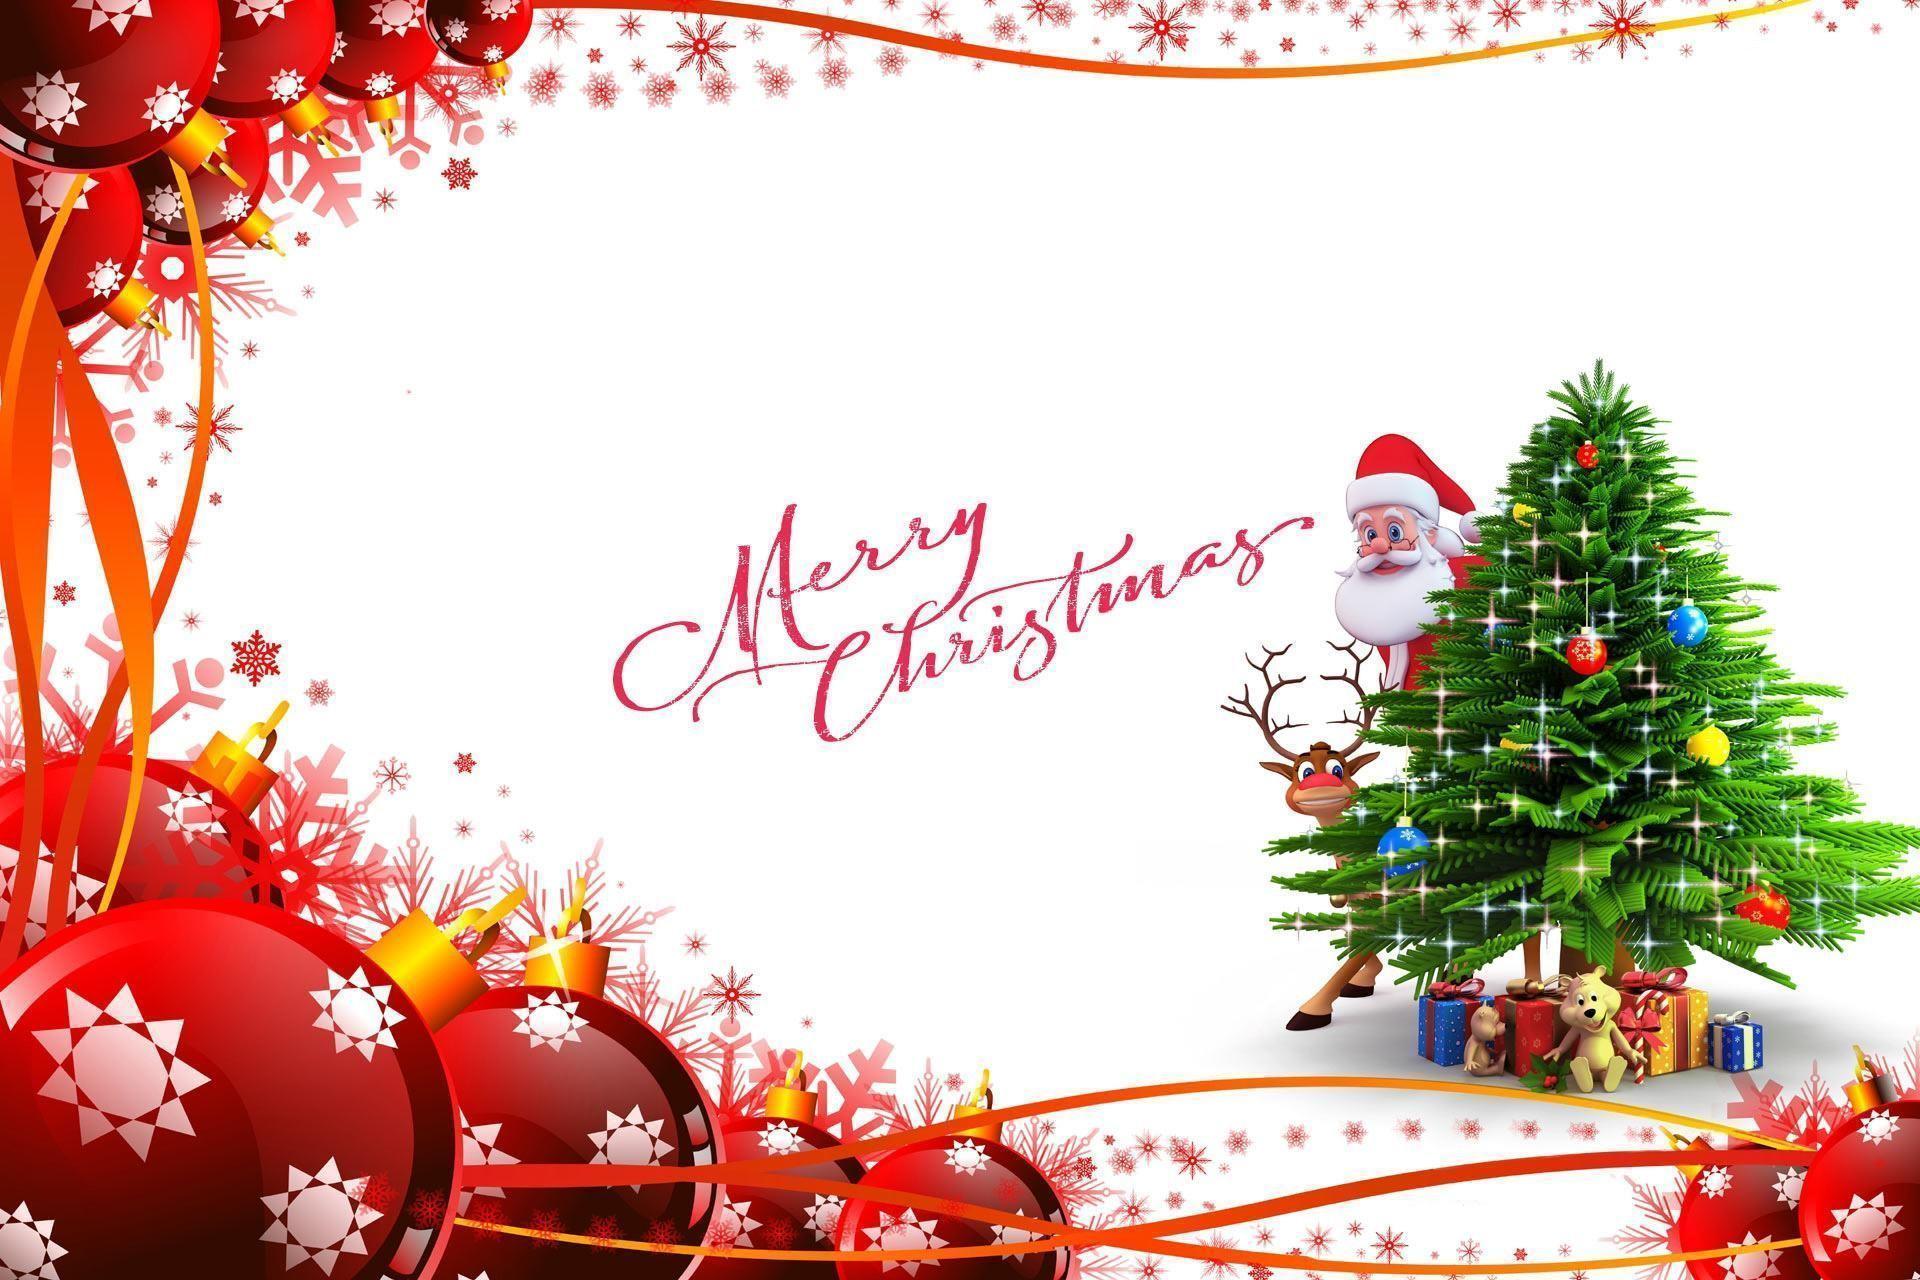 Merry Christmas HD Wallpaper 2015 New Year 2017. Happy